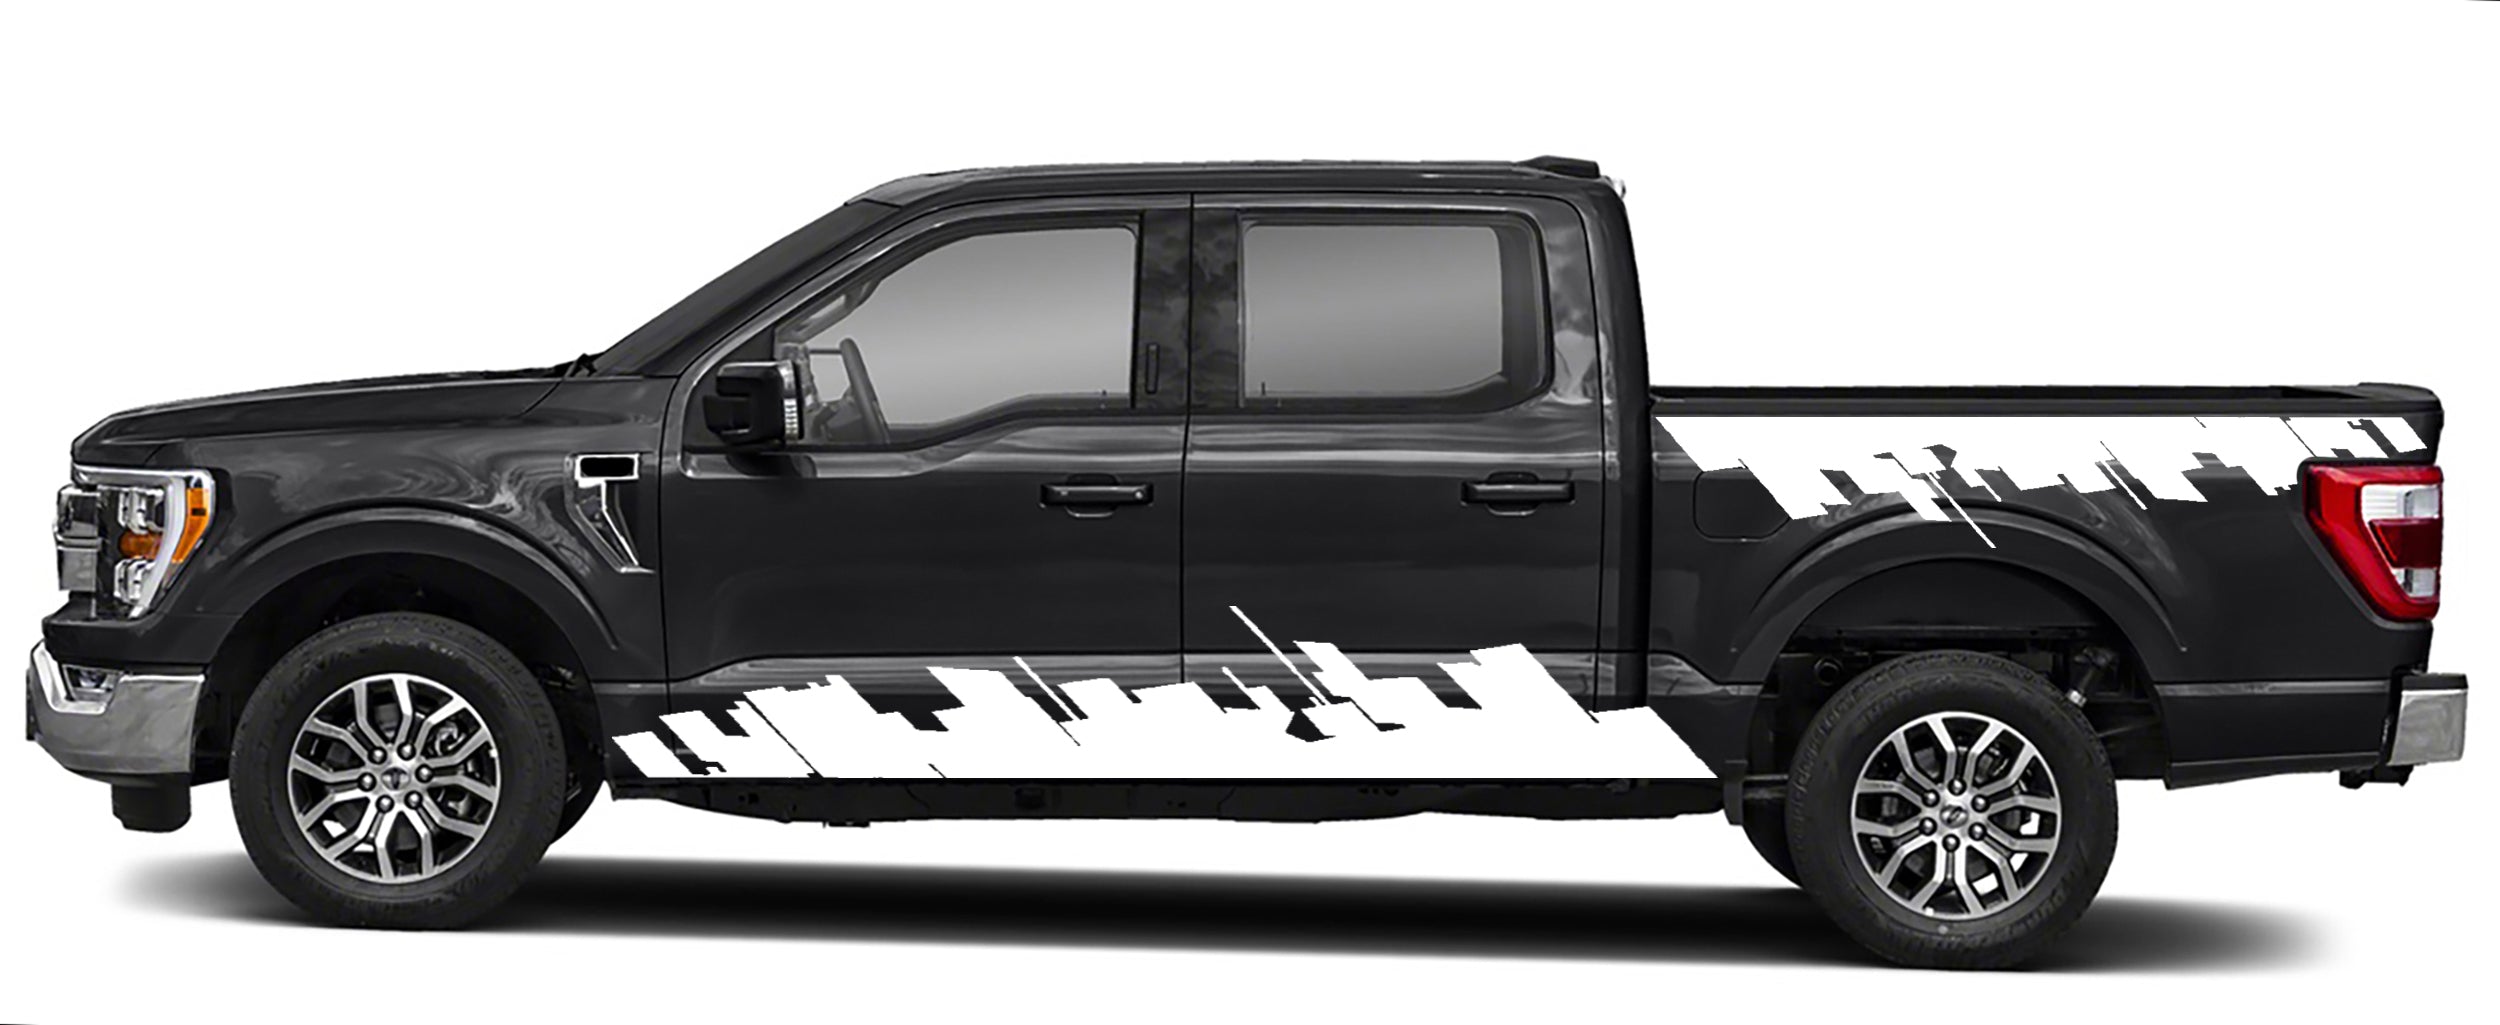 city skyline side graphics for ford f 150 2021 to 2023 models white